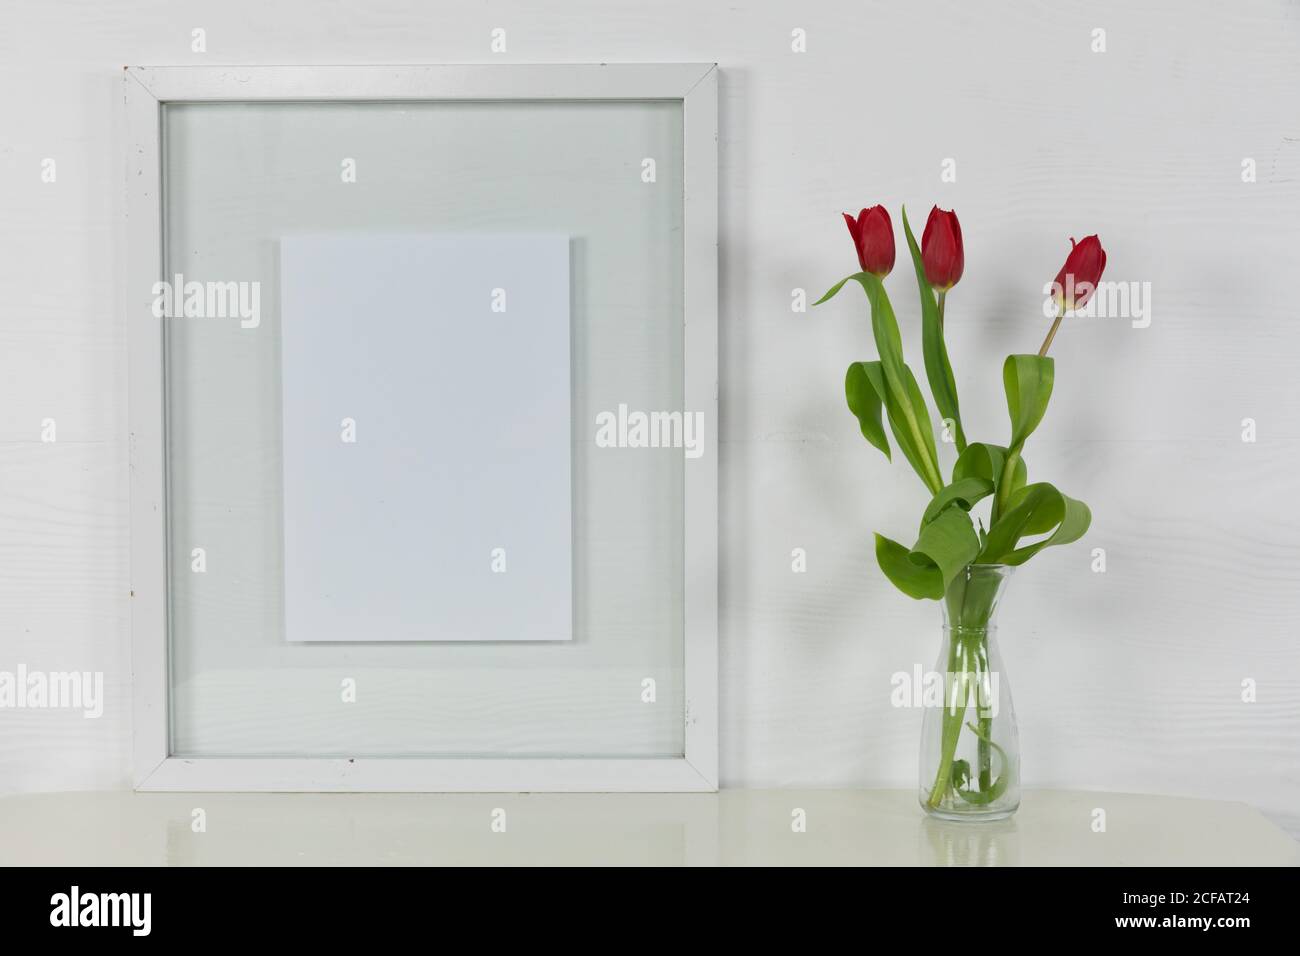 View of an empty picture frame, with red tulips in a glass vase on plain white background Stock Photo